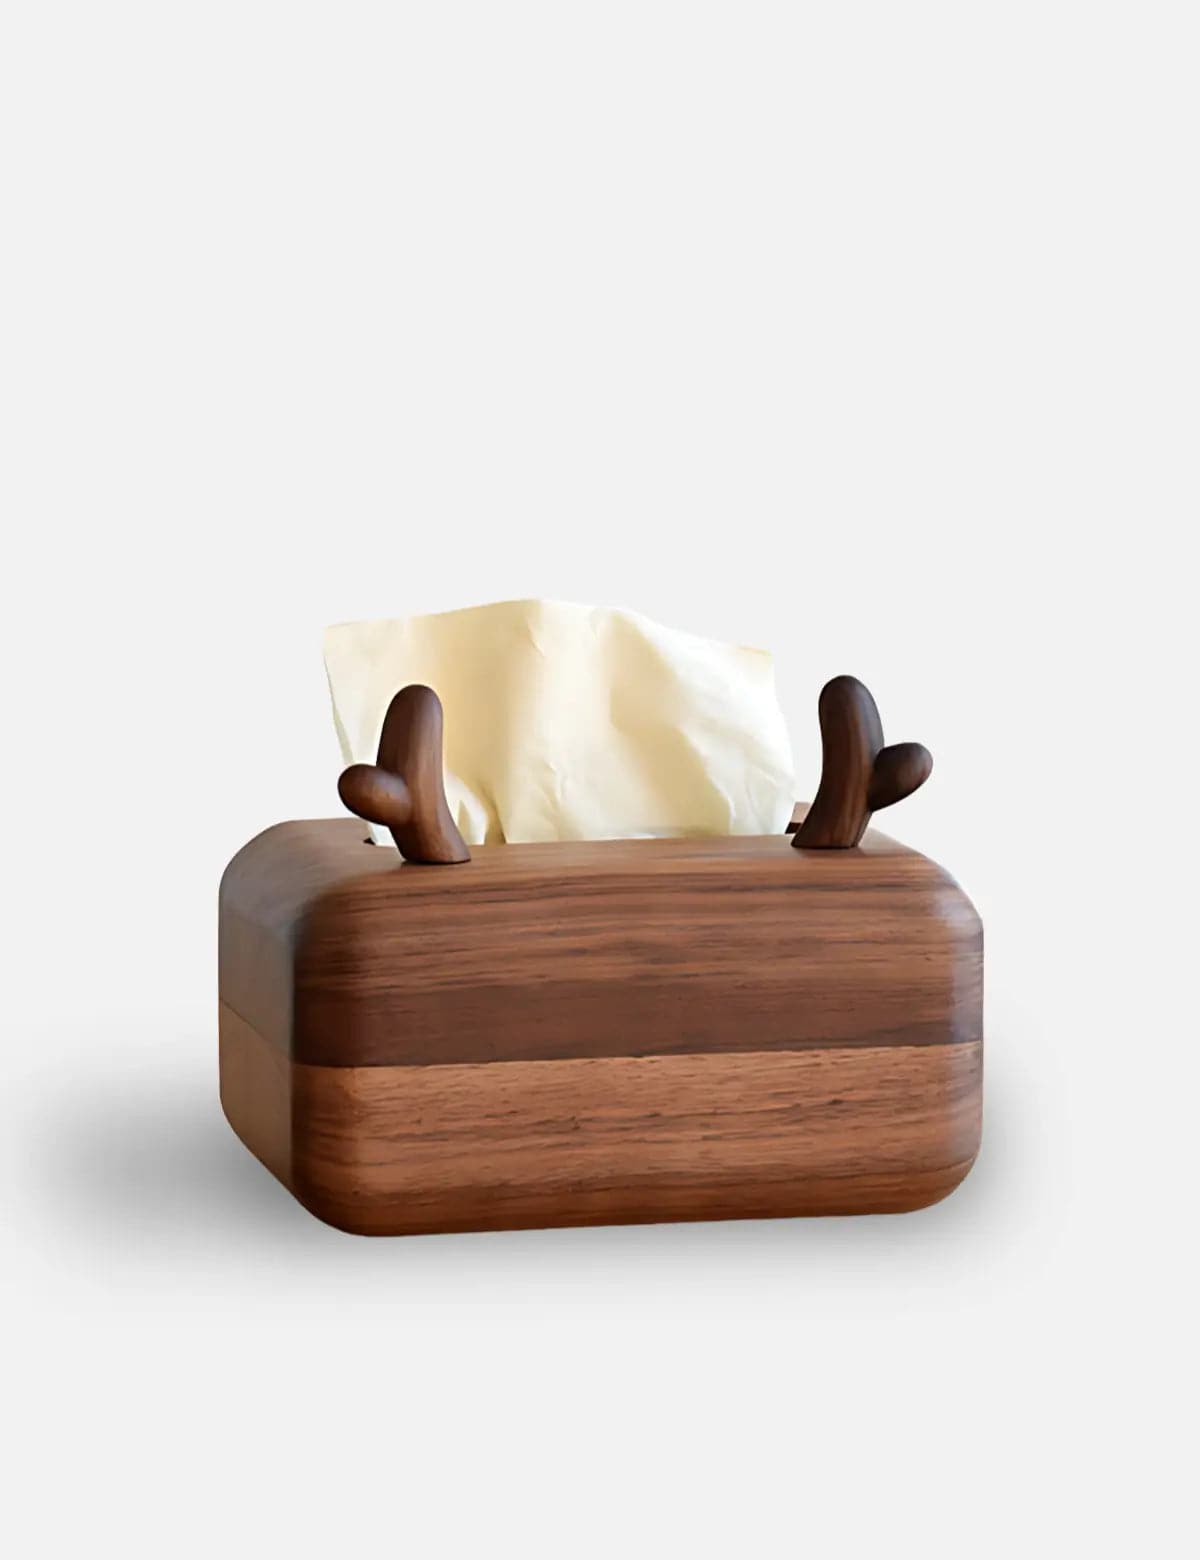 Wooden-Deer-Antler-Tissue-Box-Decorative-Home-Accessory-01